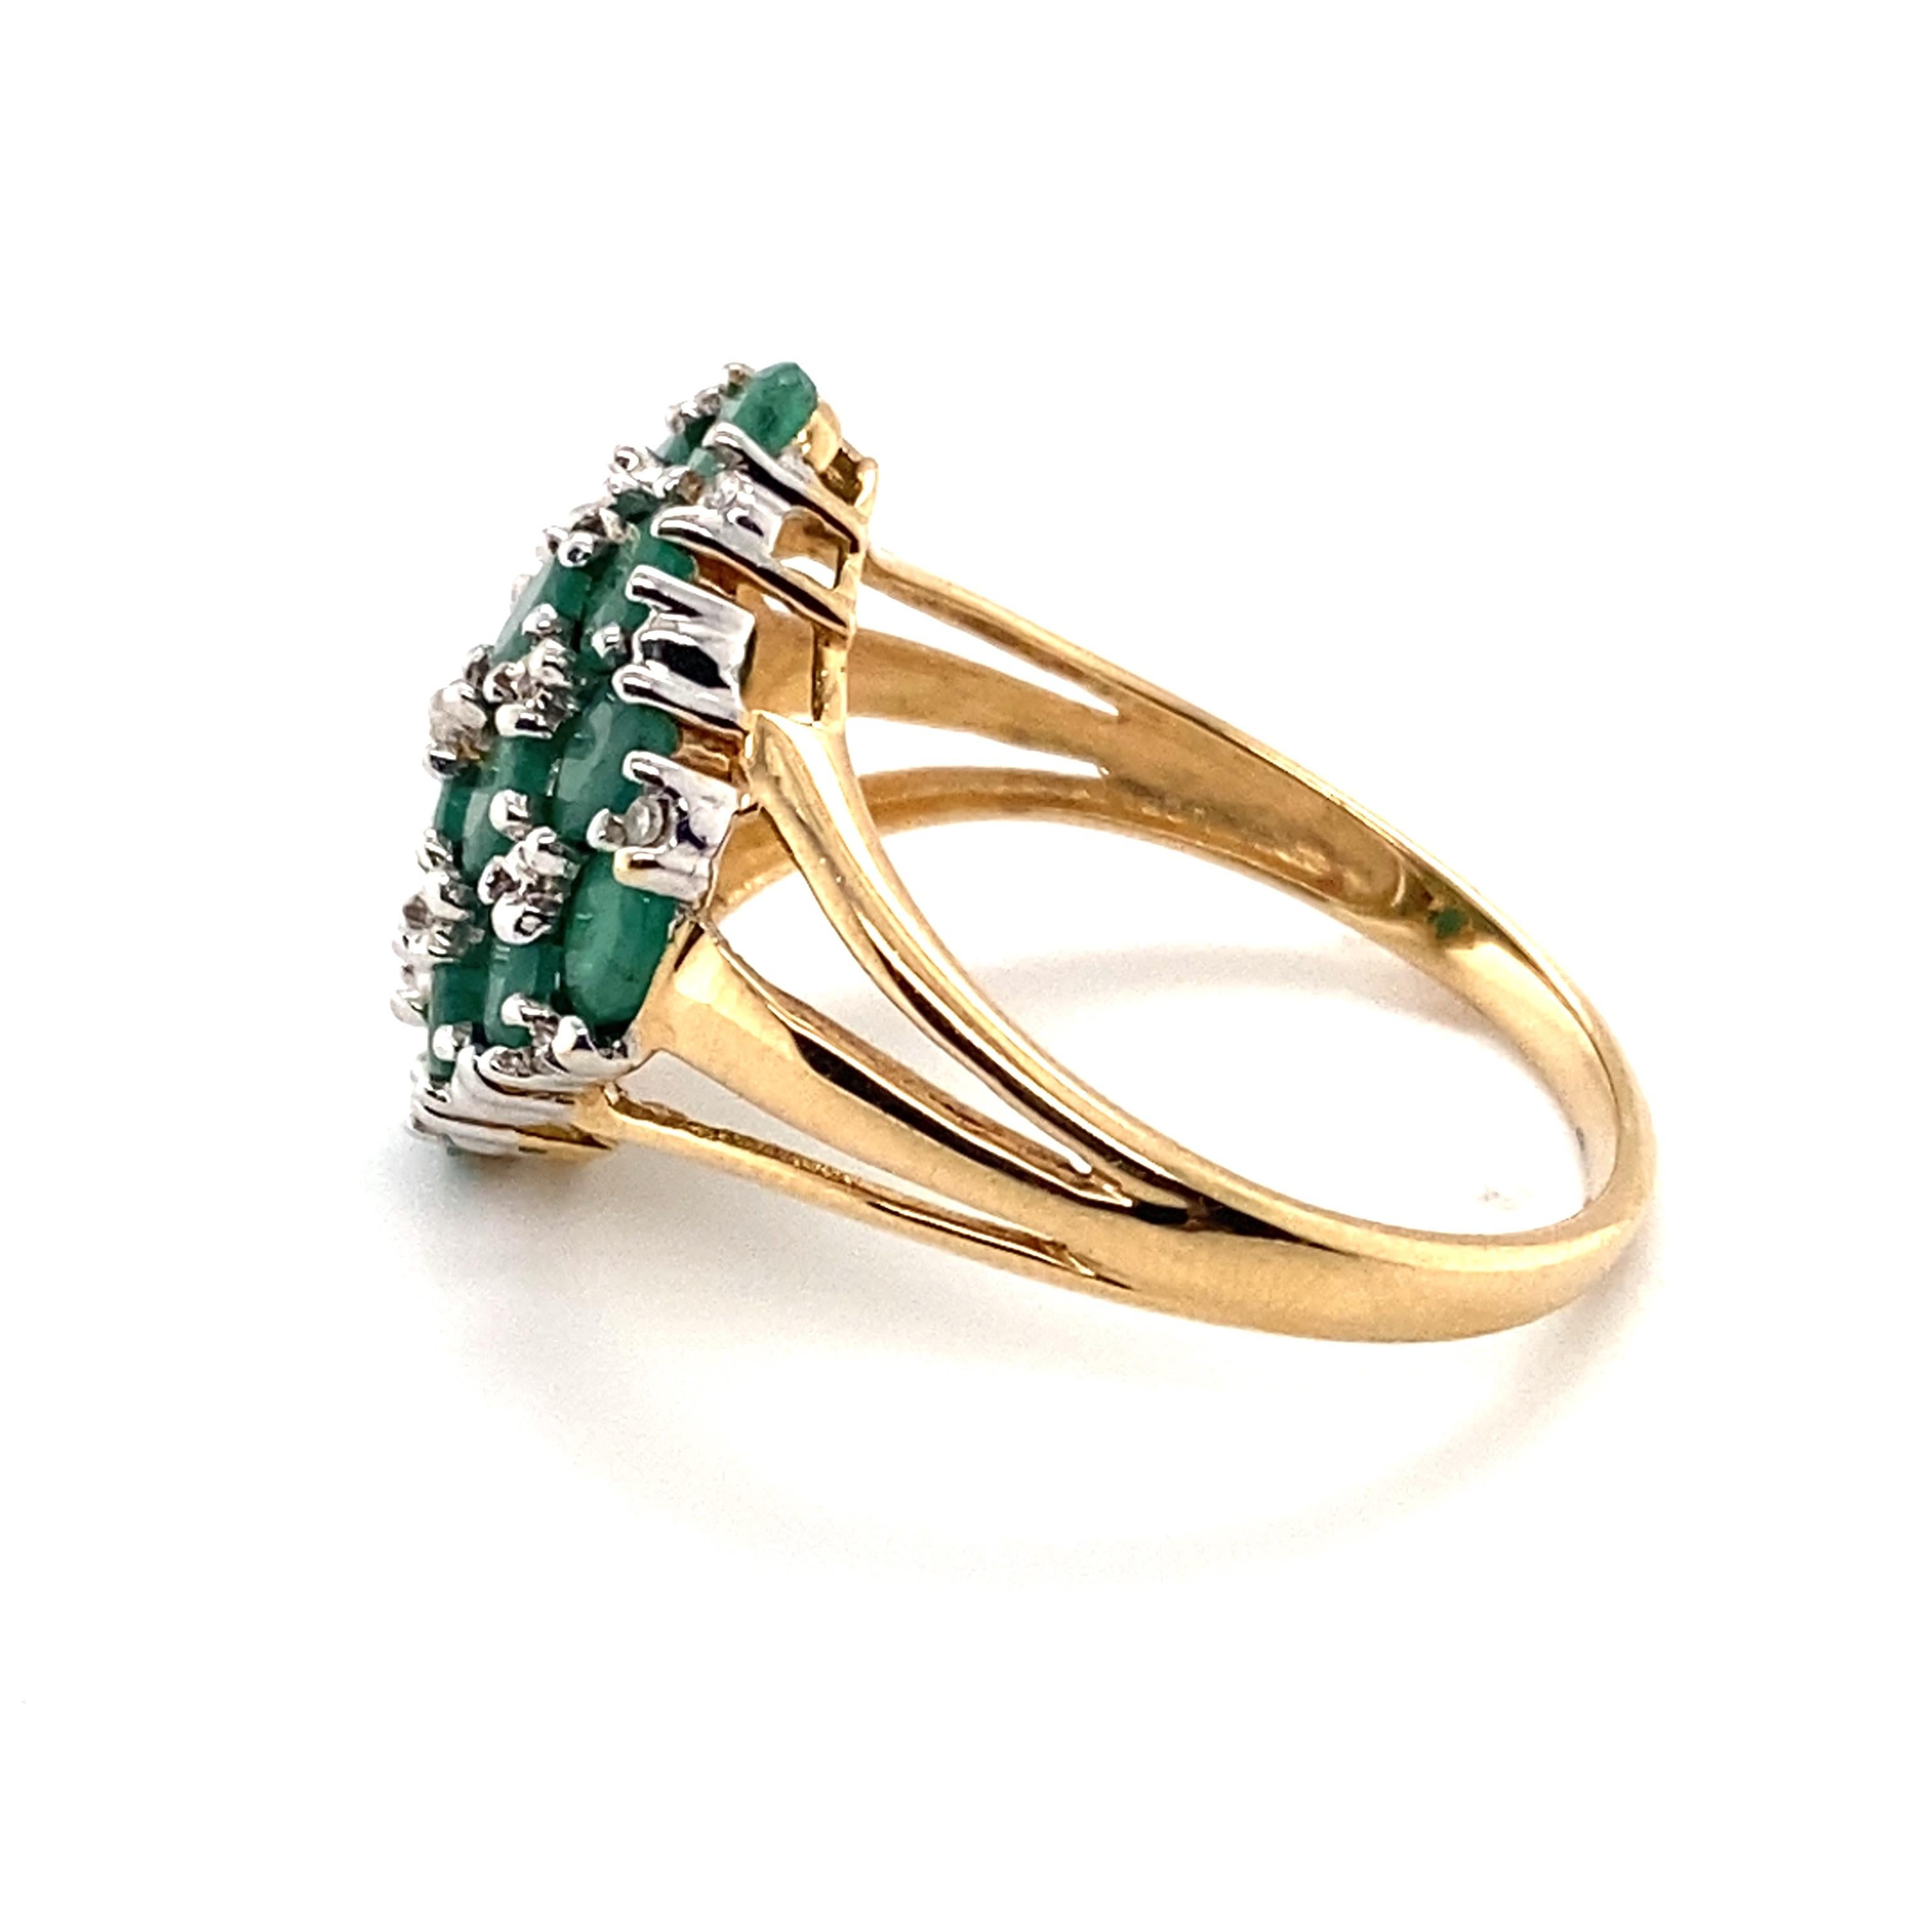 1.92 Carat Emerald and Diamond Ring in 14 Karat Yellow Gold In Excellent Condition For Sale In Atlanta, GA